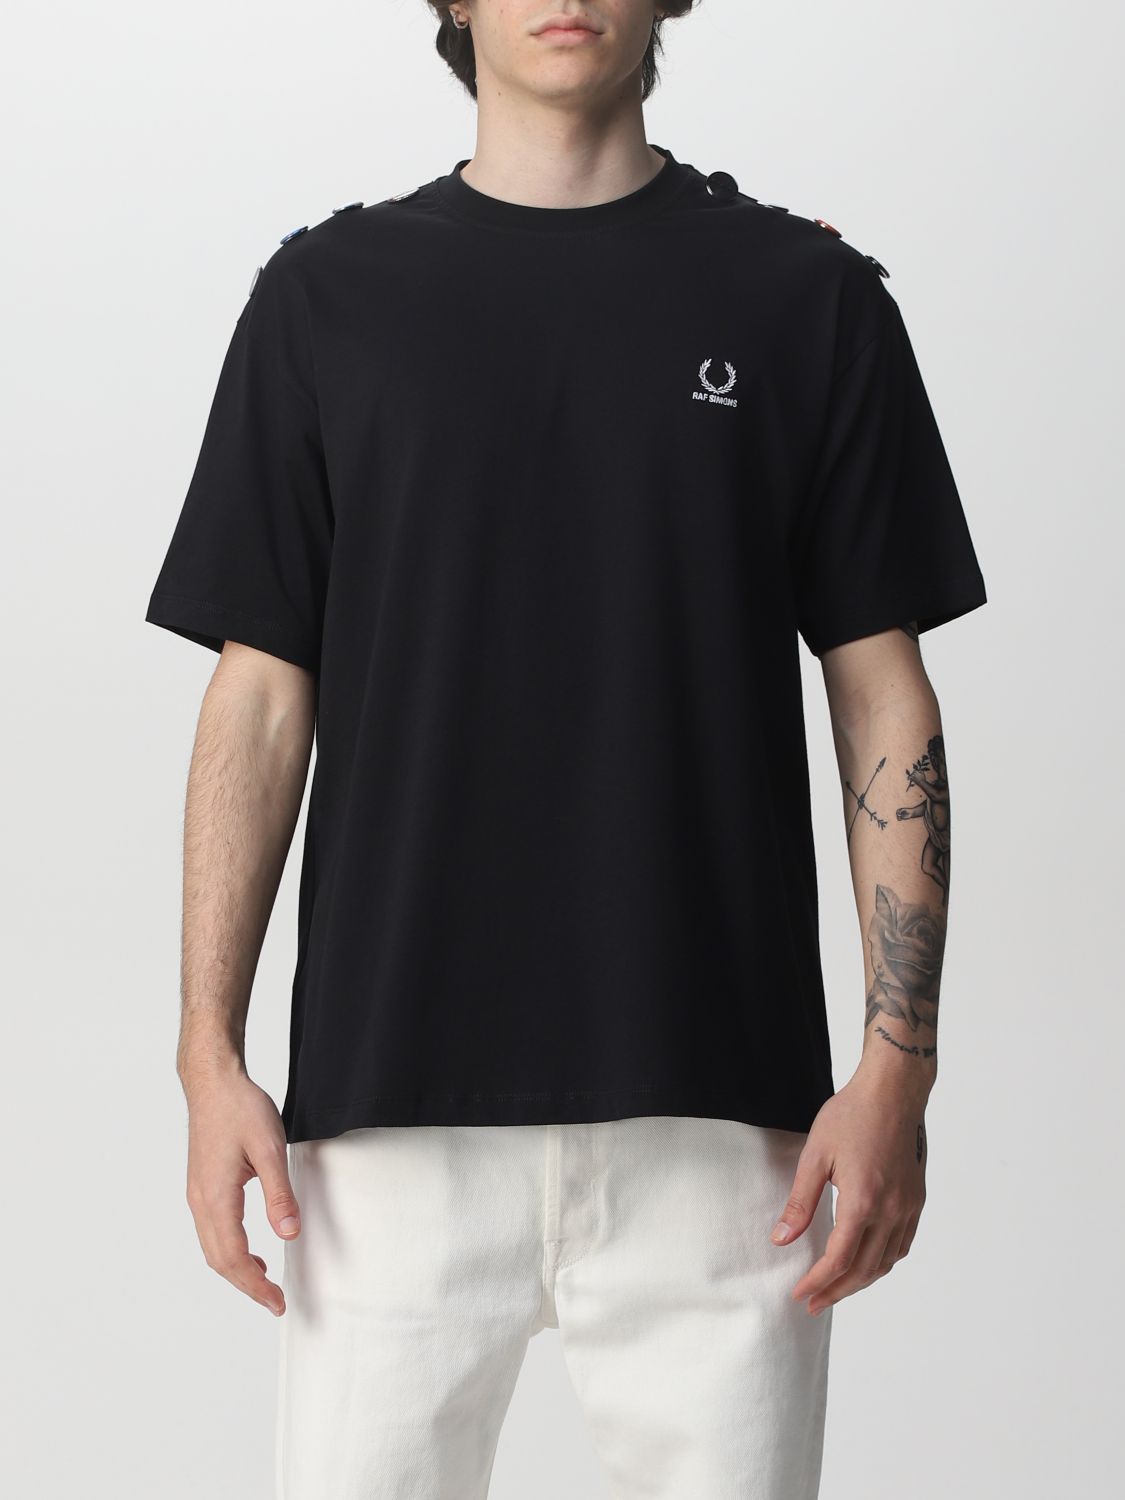 T-shirt Fred Perry By Raf Simons: T-shirt Fred Perry By Raf Simons homme noir 1